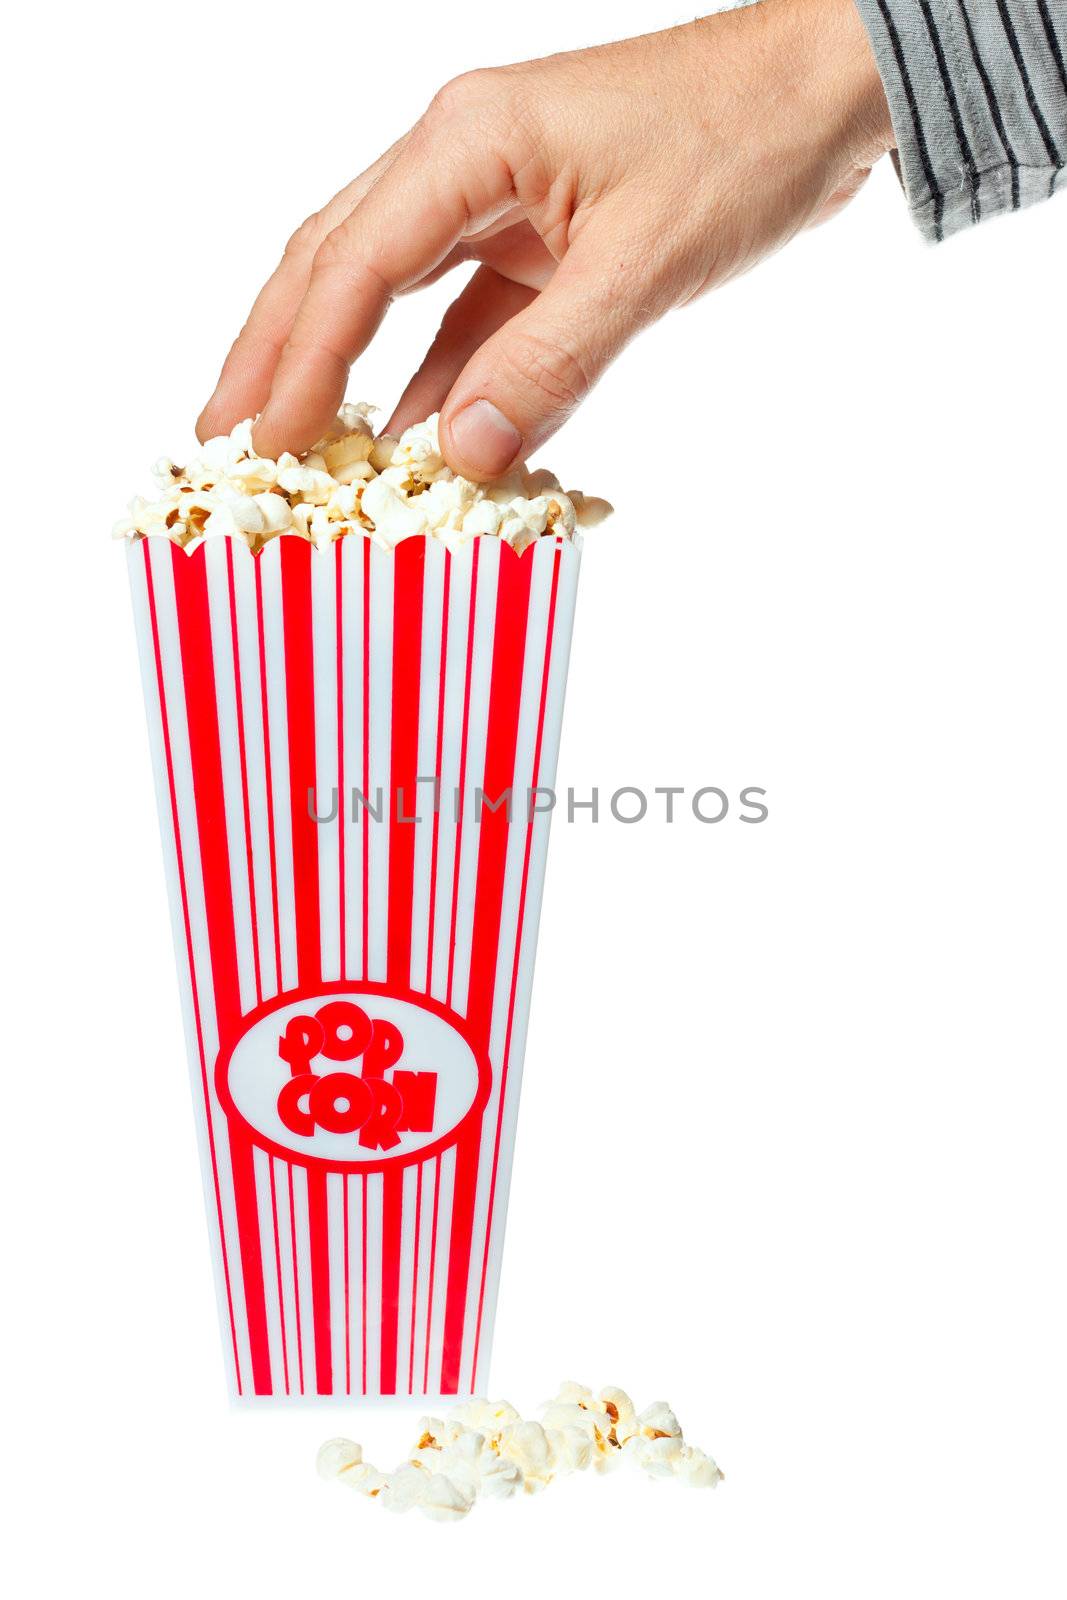 A hand grabbing delicious popcorn out of a container. Isolated over white.